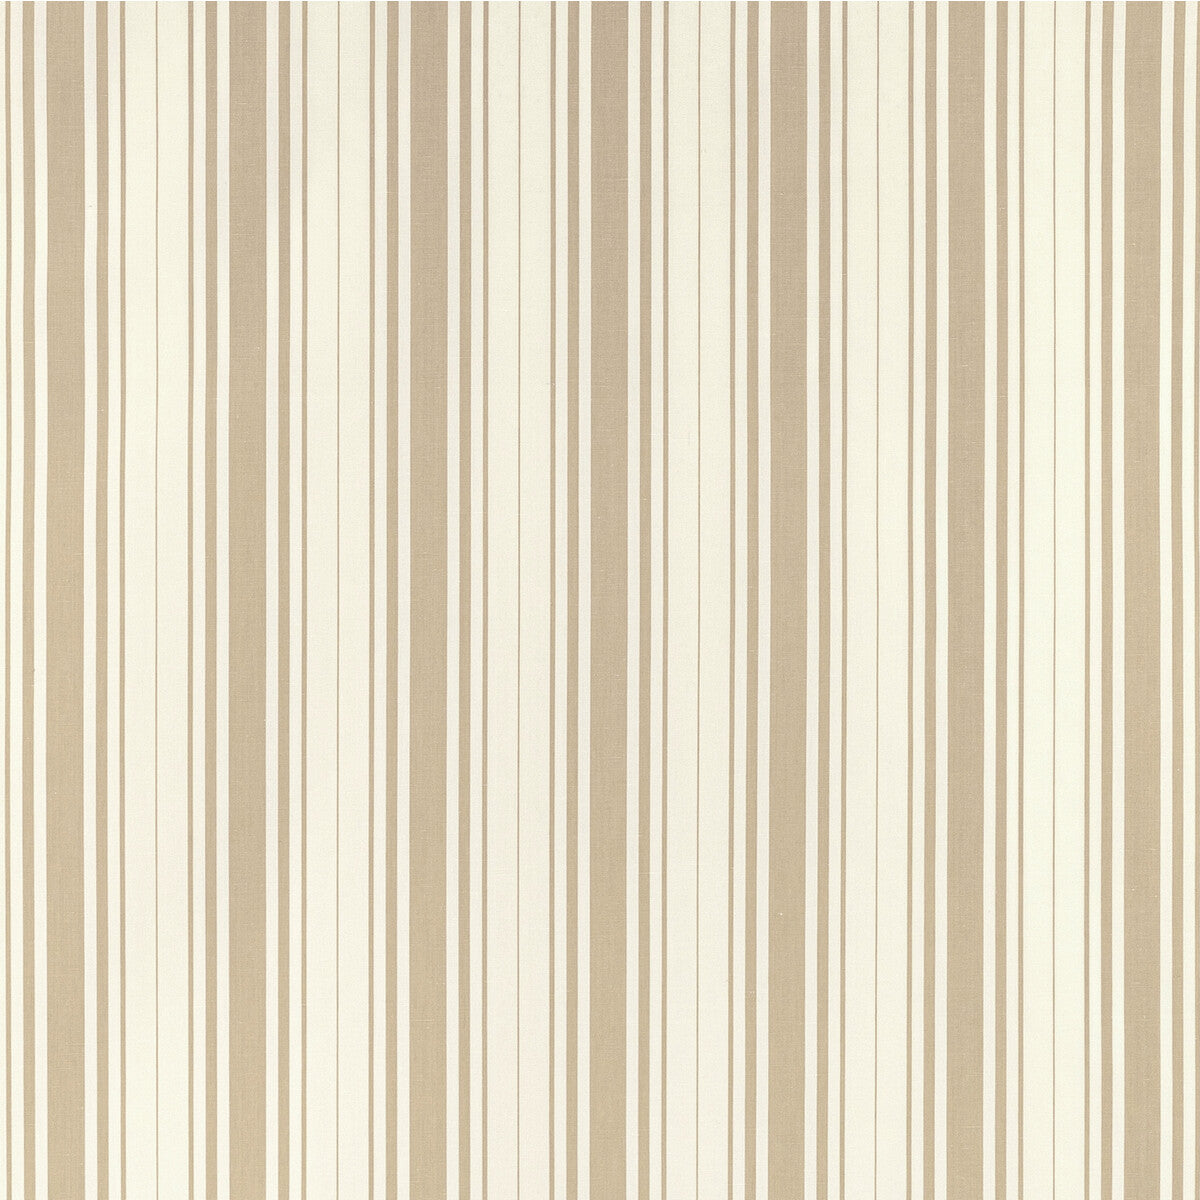 Baldwin Stripe fabric in stone color - pattern 2022100.16.0 - by Lee Jofa in the Sarah Bartholomew collection